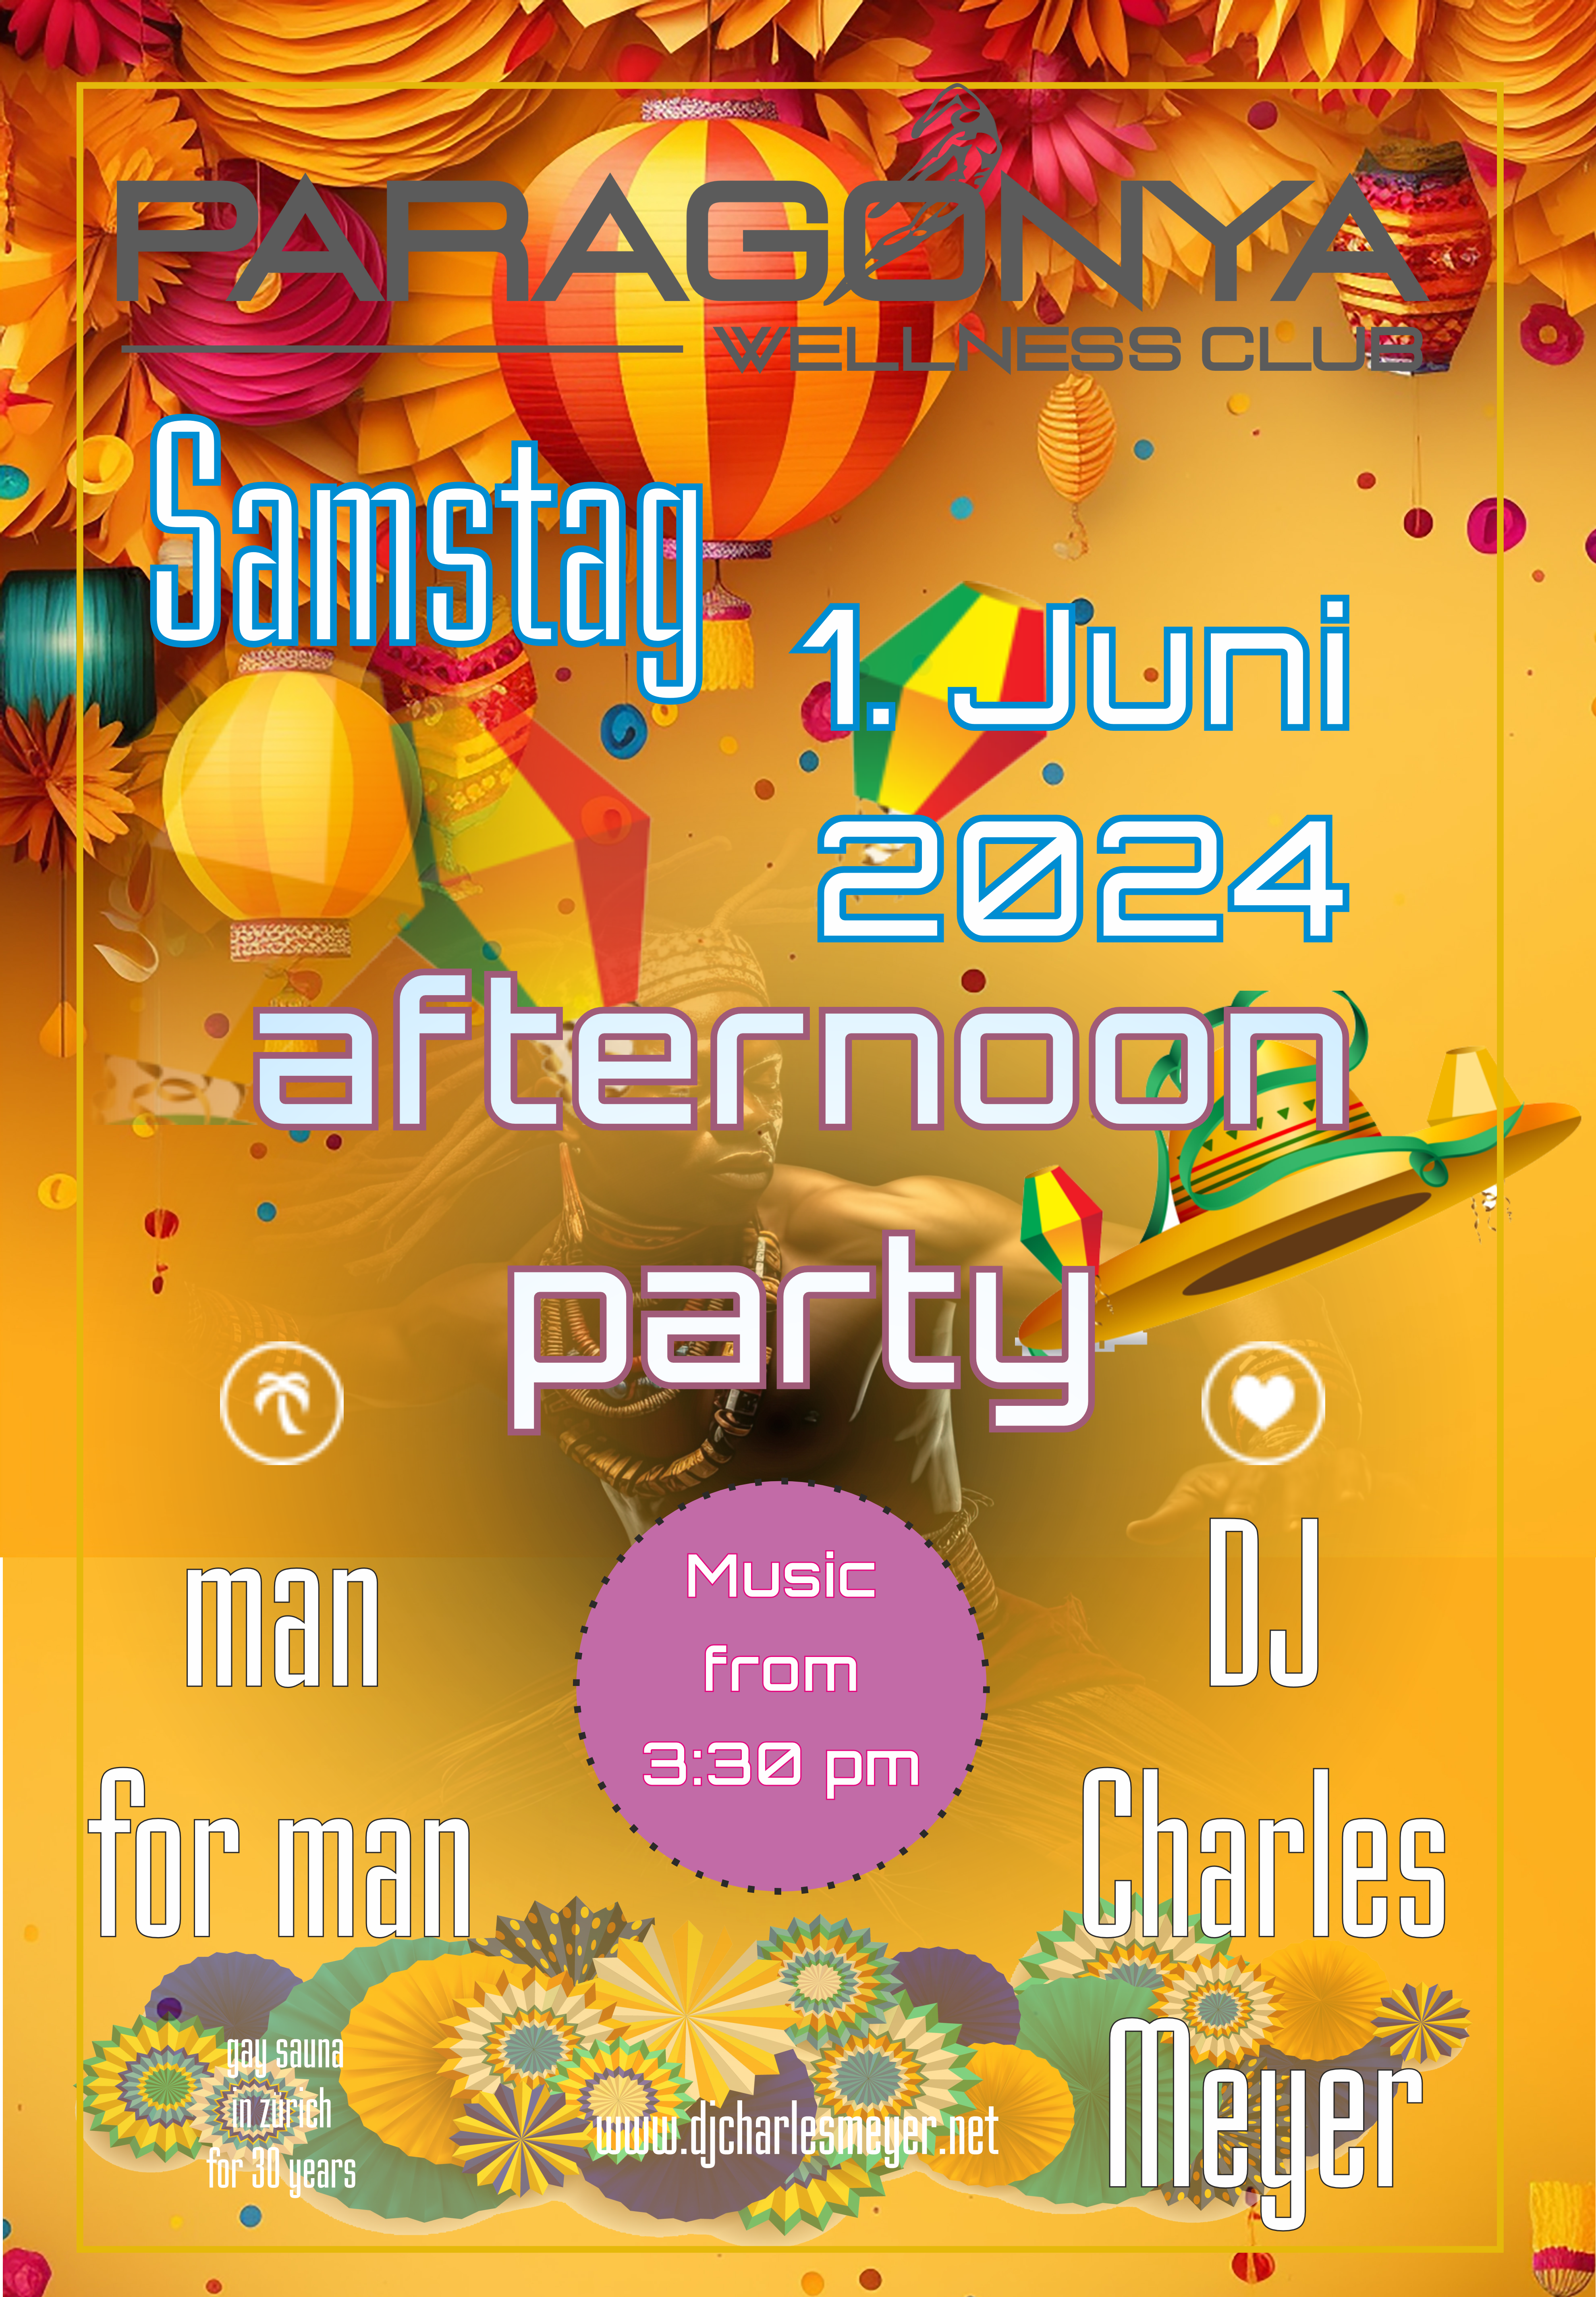 Samstag - 1. Juni 2024 Afternoon Party